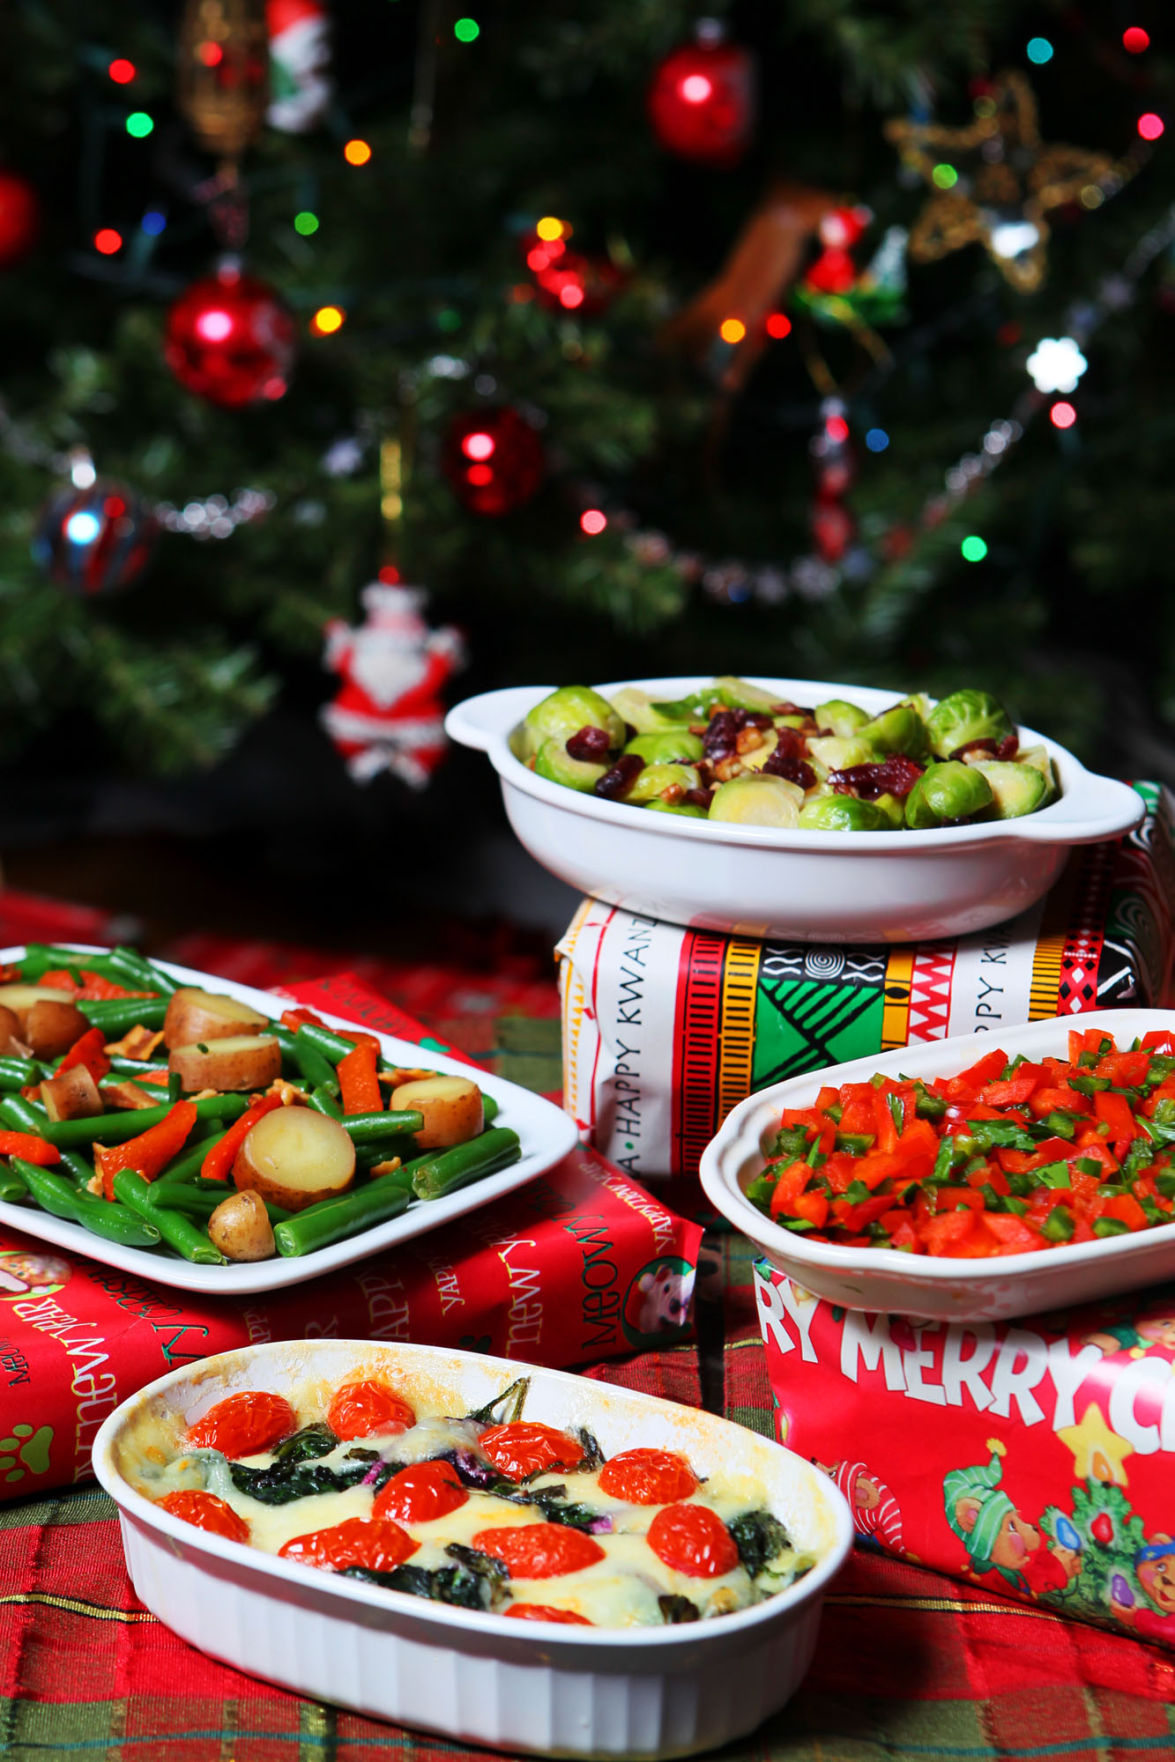 High Quality Christmas Party Food Images | Best Inspirational Pictures ...